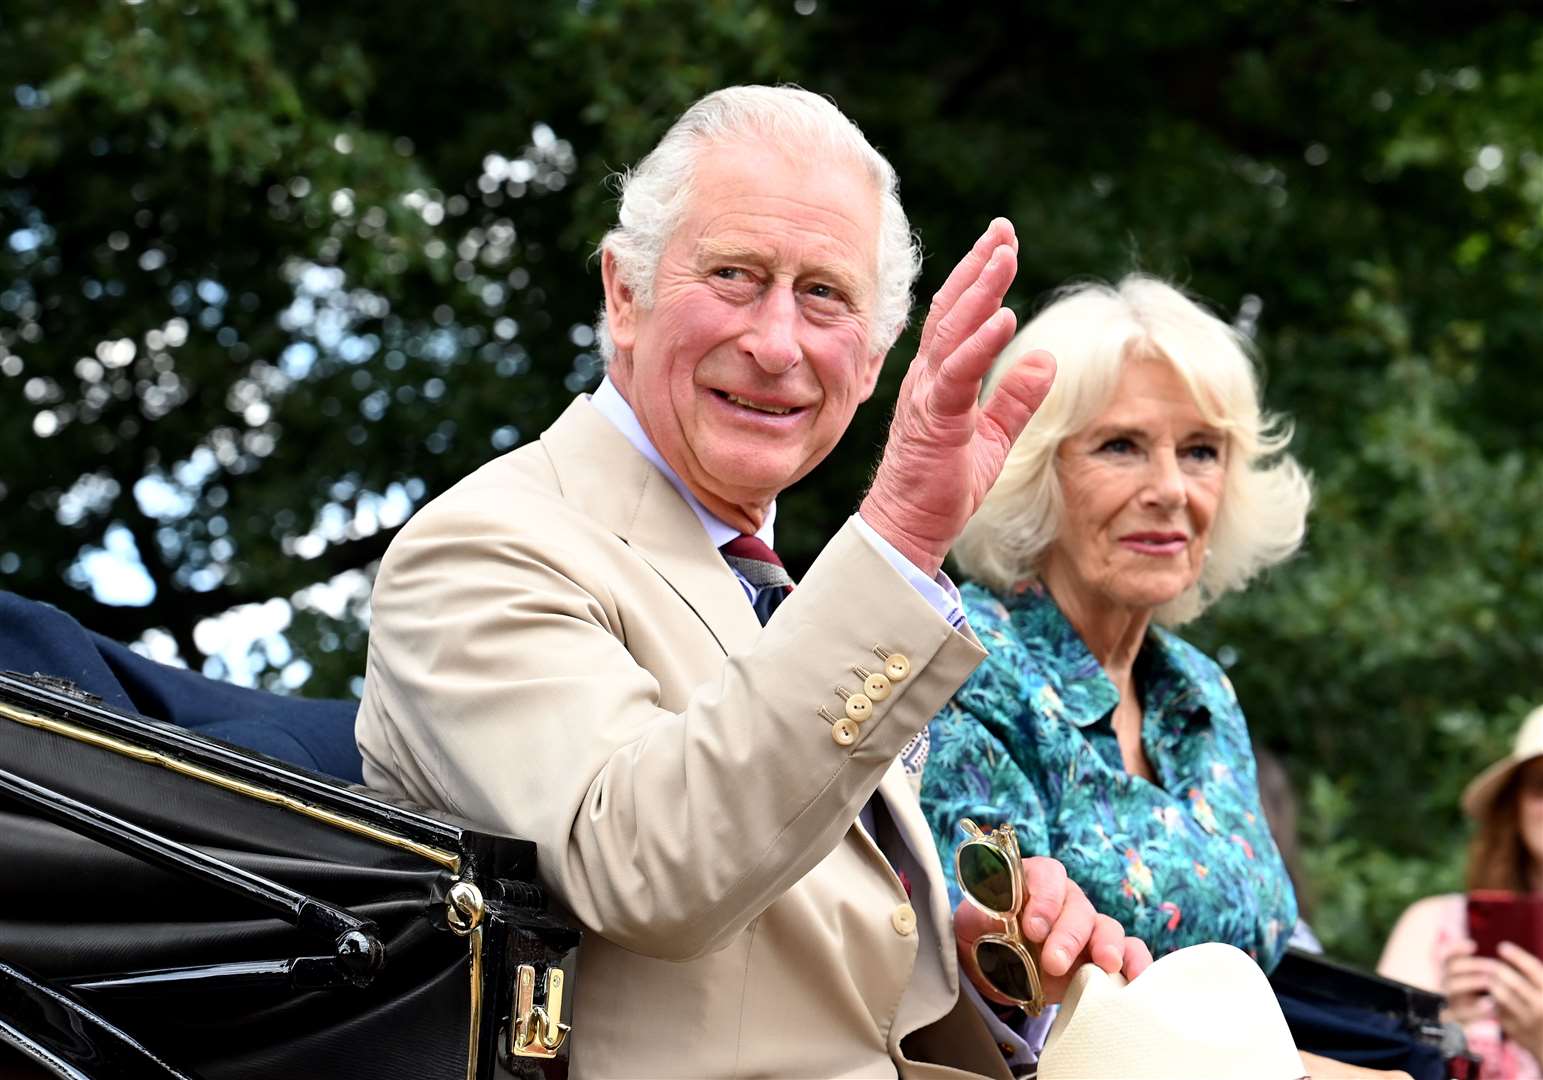 Prince Charles and Camilla Duchess of Cornwall will leave from Buckingham Palace